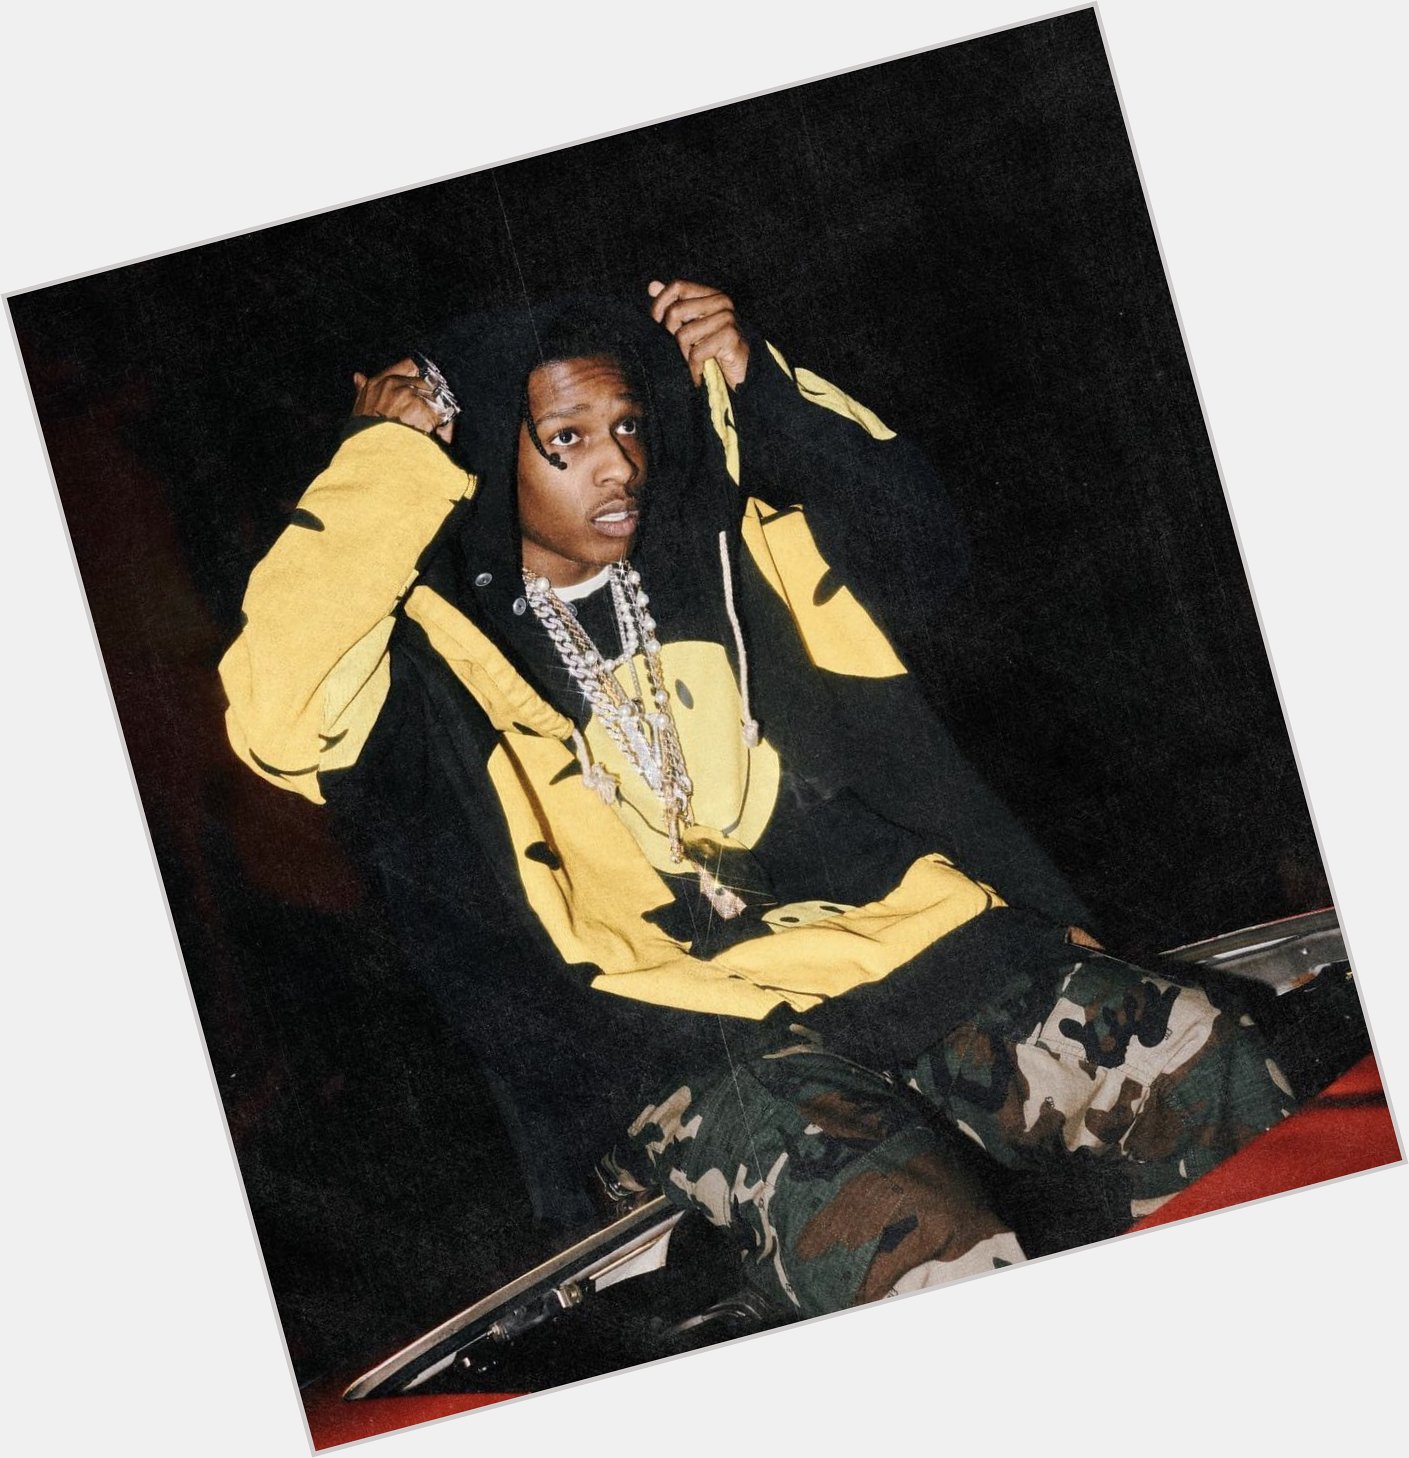   ASAP Rocky turns 34 years old today, Happy Birthday 